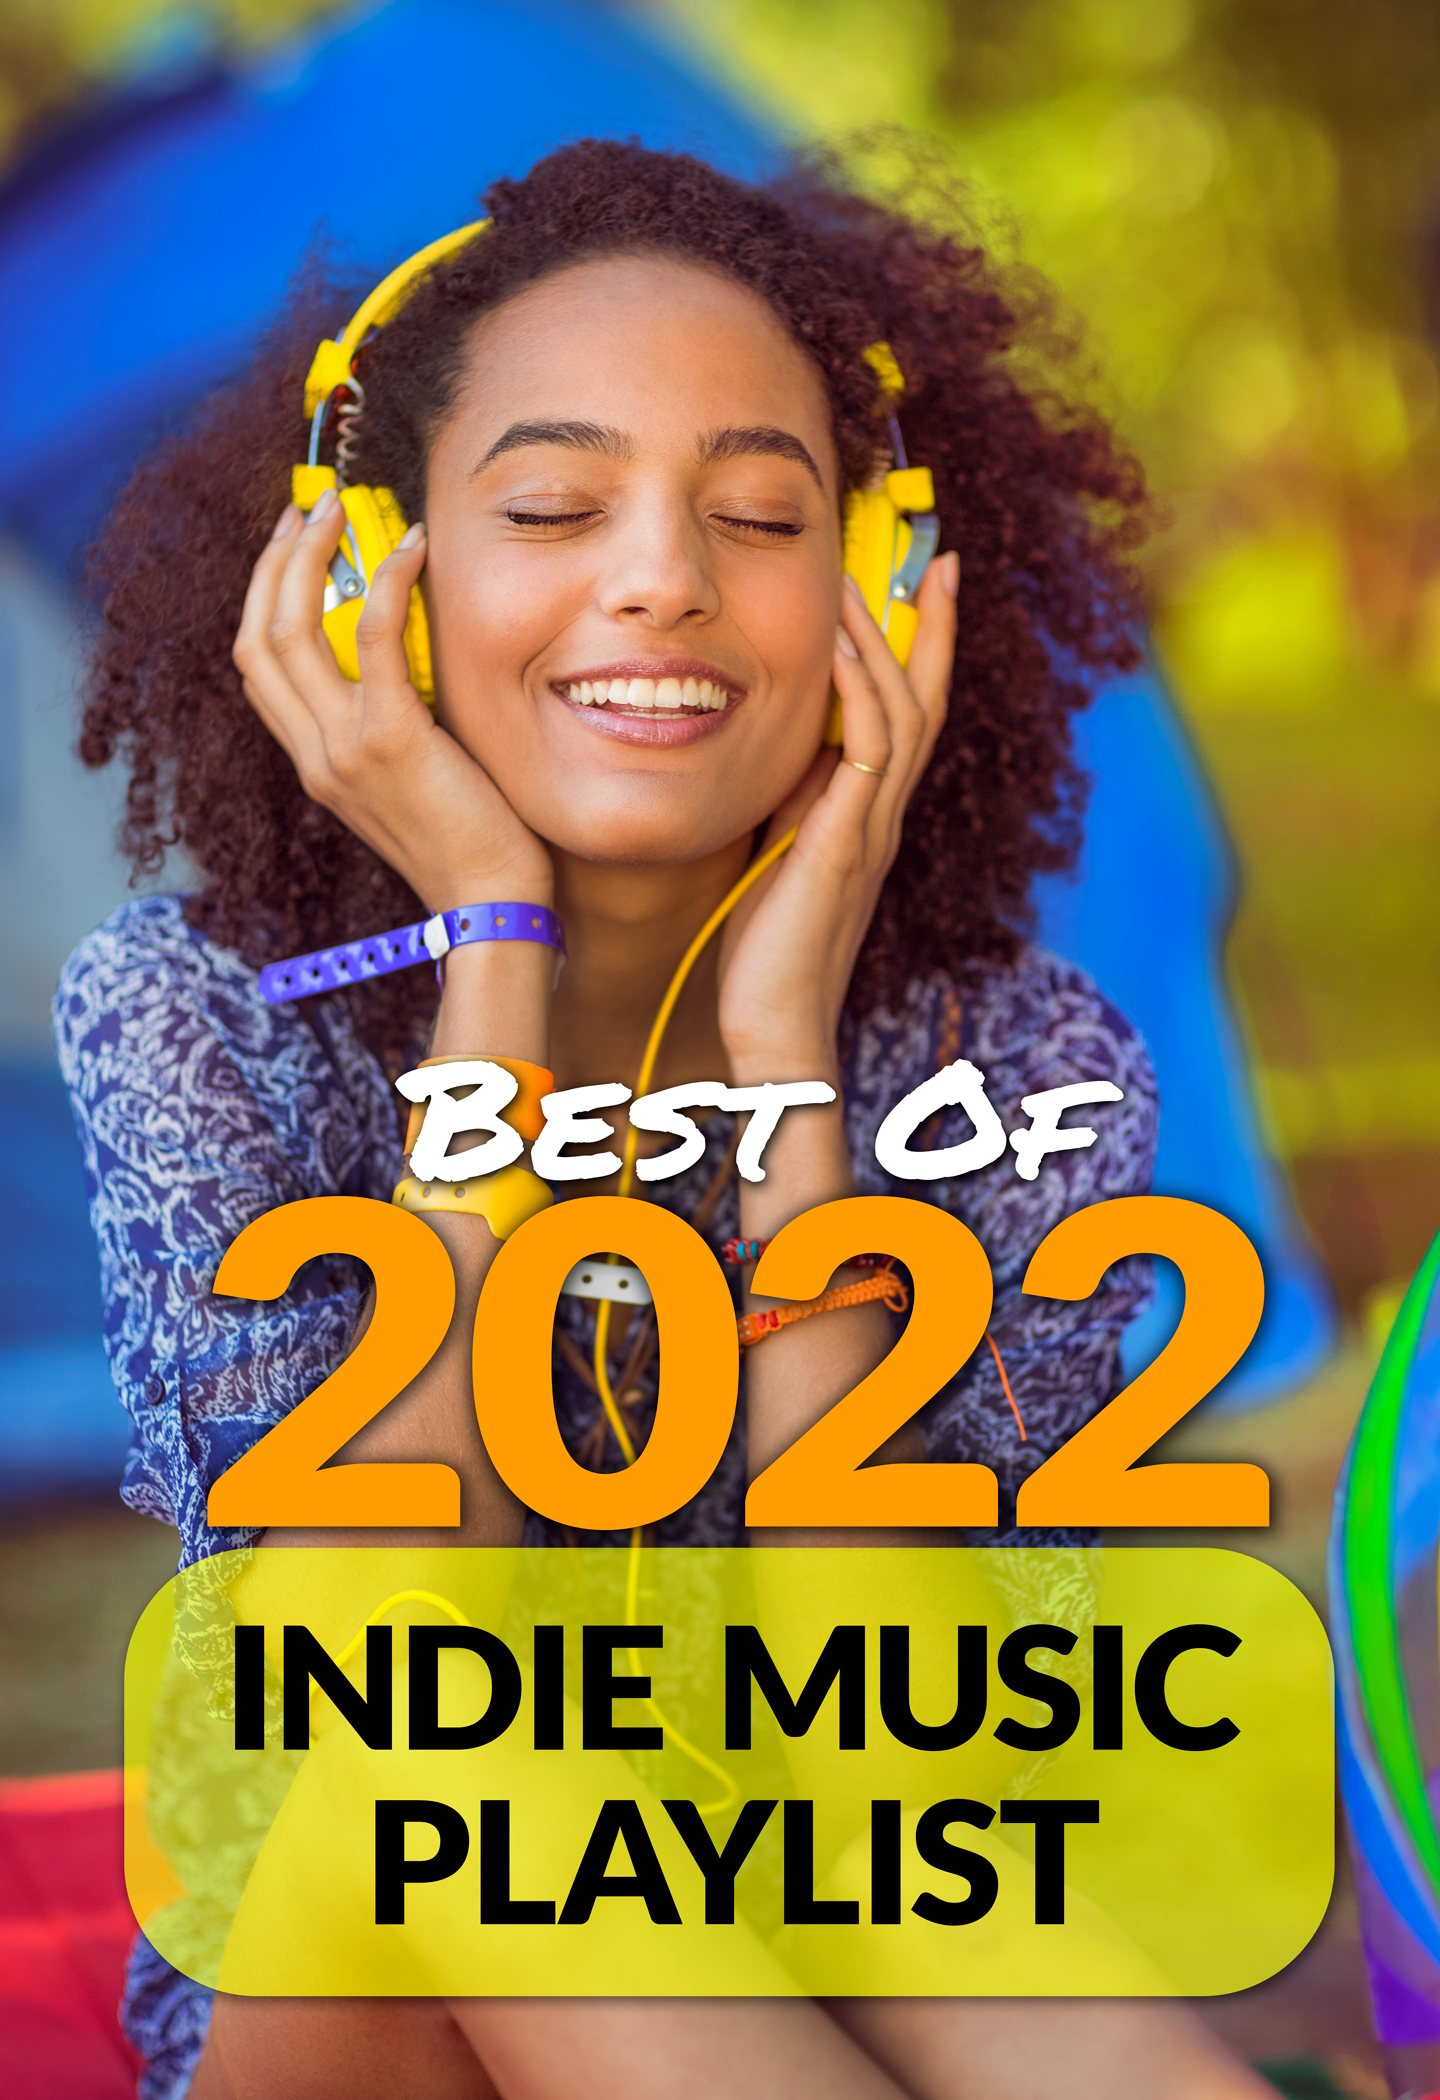 Best of 2022 Indie Music Playlist - Over 677 songs - Spotify Playlist full of new music